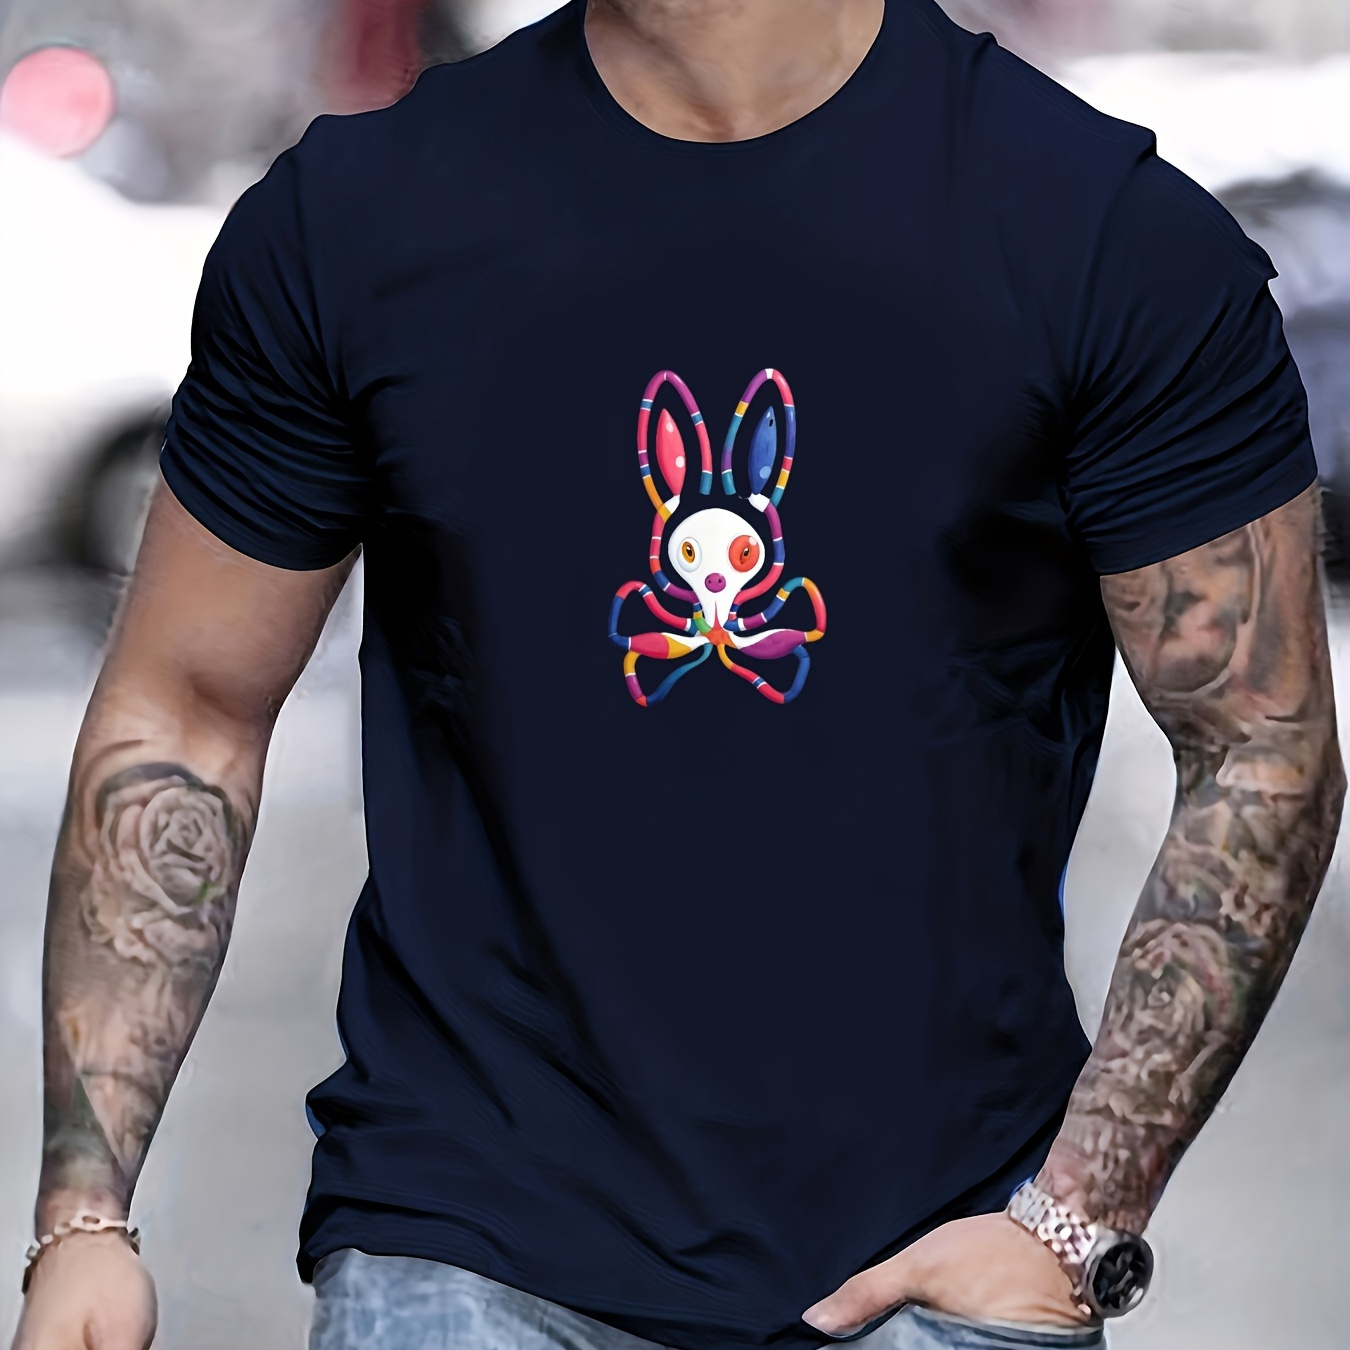 

Colored Rabbits And Skeletons, Print Tee Shirt, Tees For Men, Casual Short Sleeve T-shirt For Summer